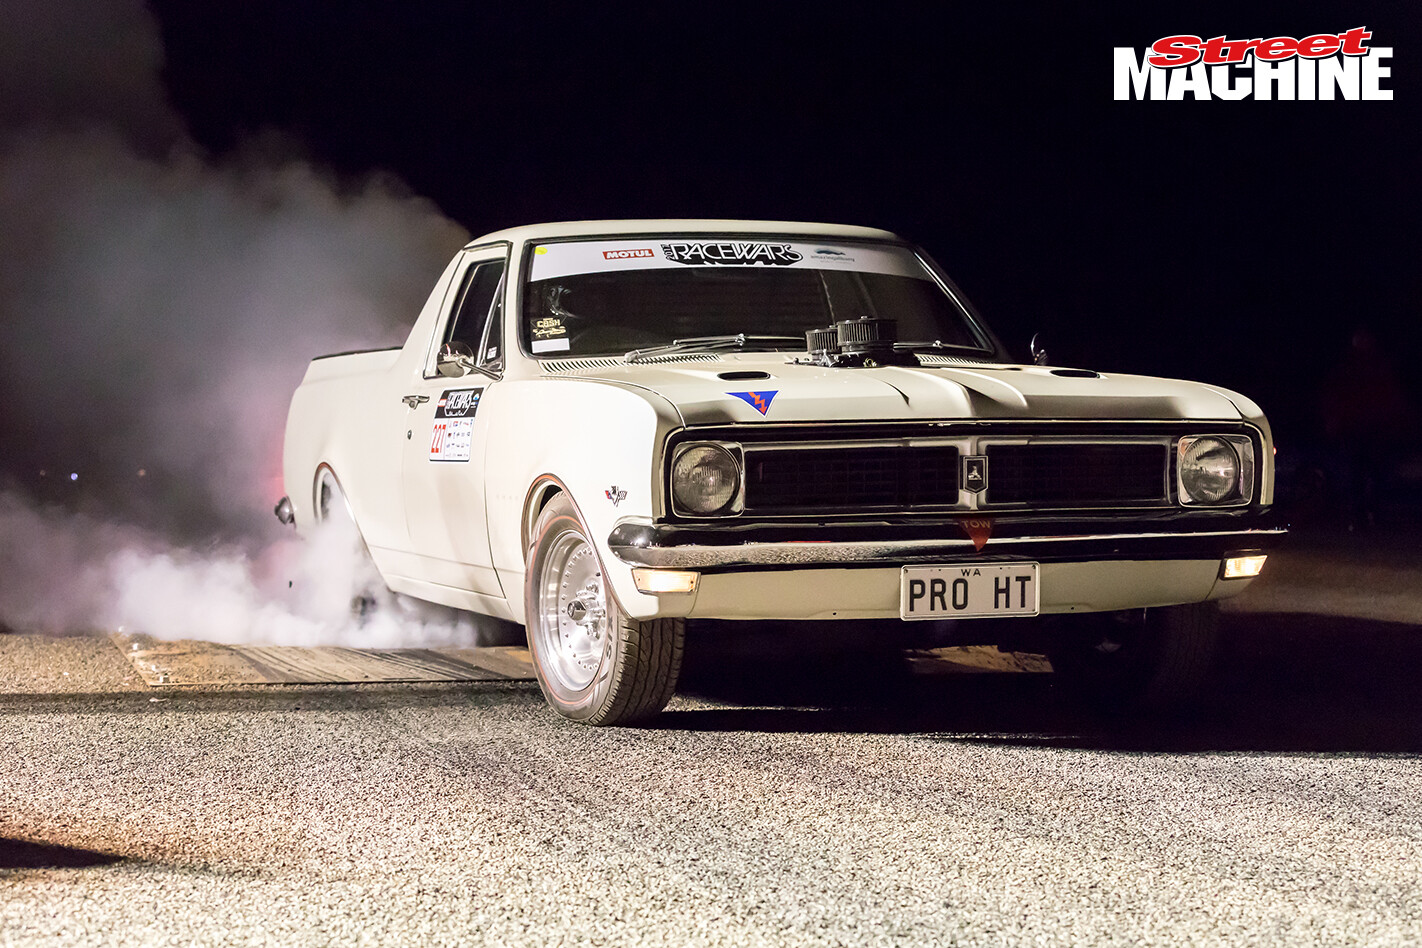 408CI SMALL-BLOCK CHEV-POWERED HT HOLDEN UTE AT RACEWARS